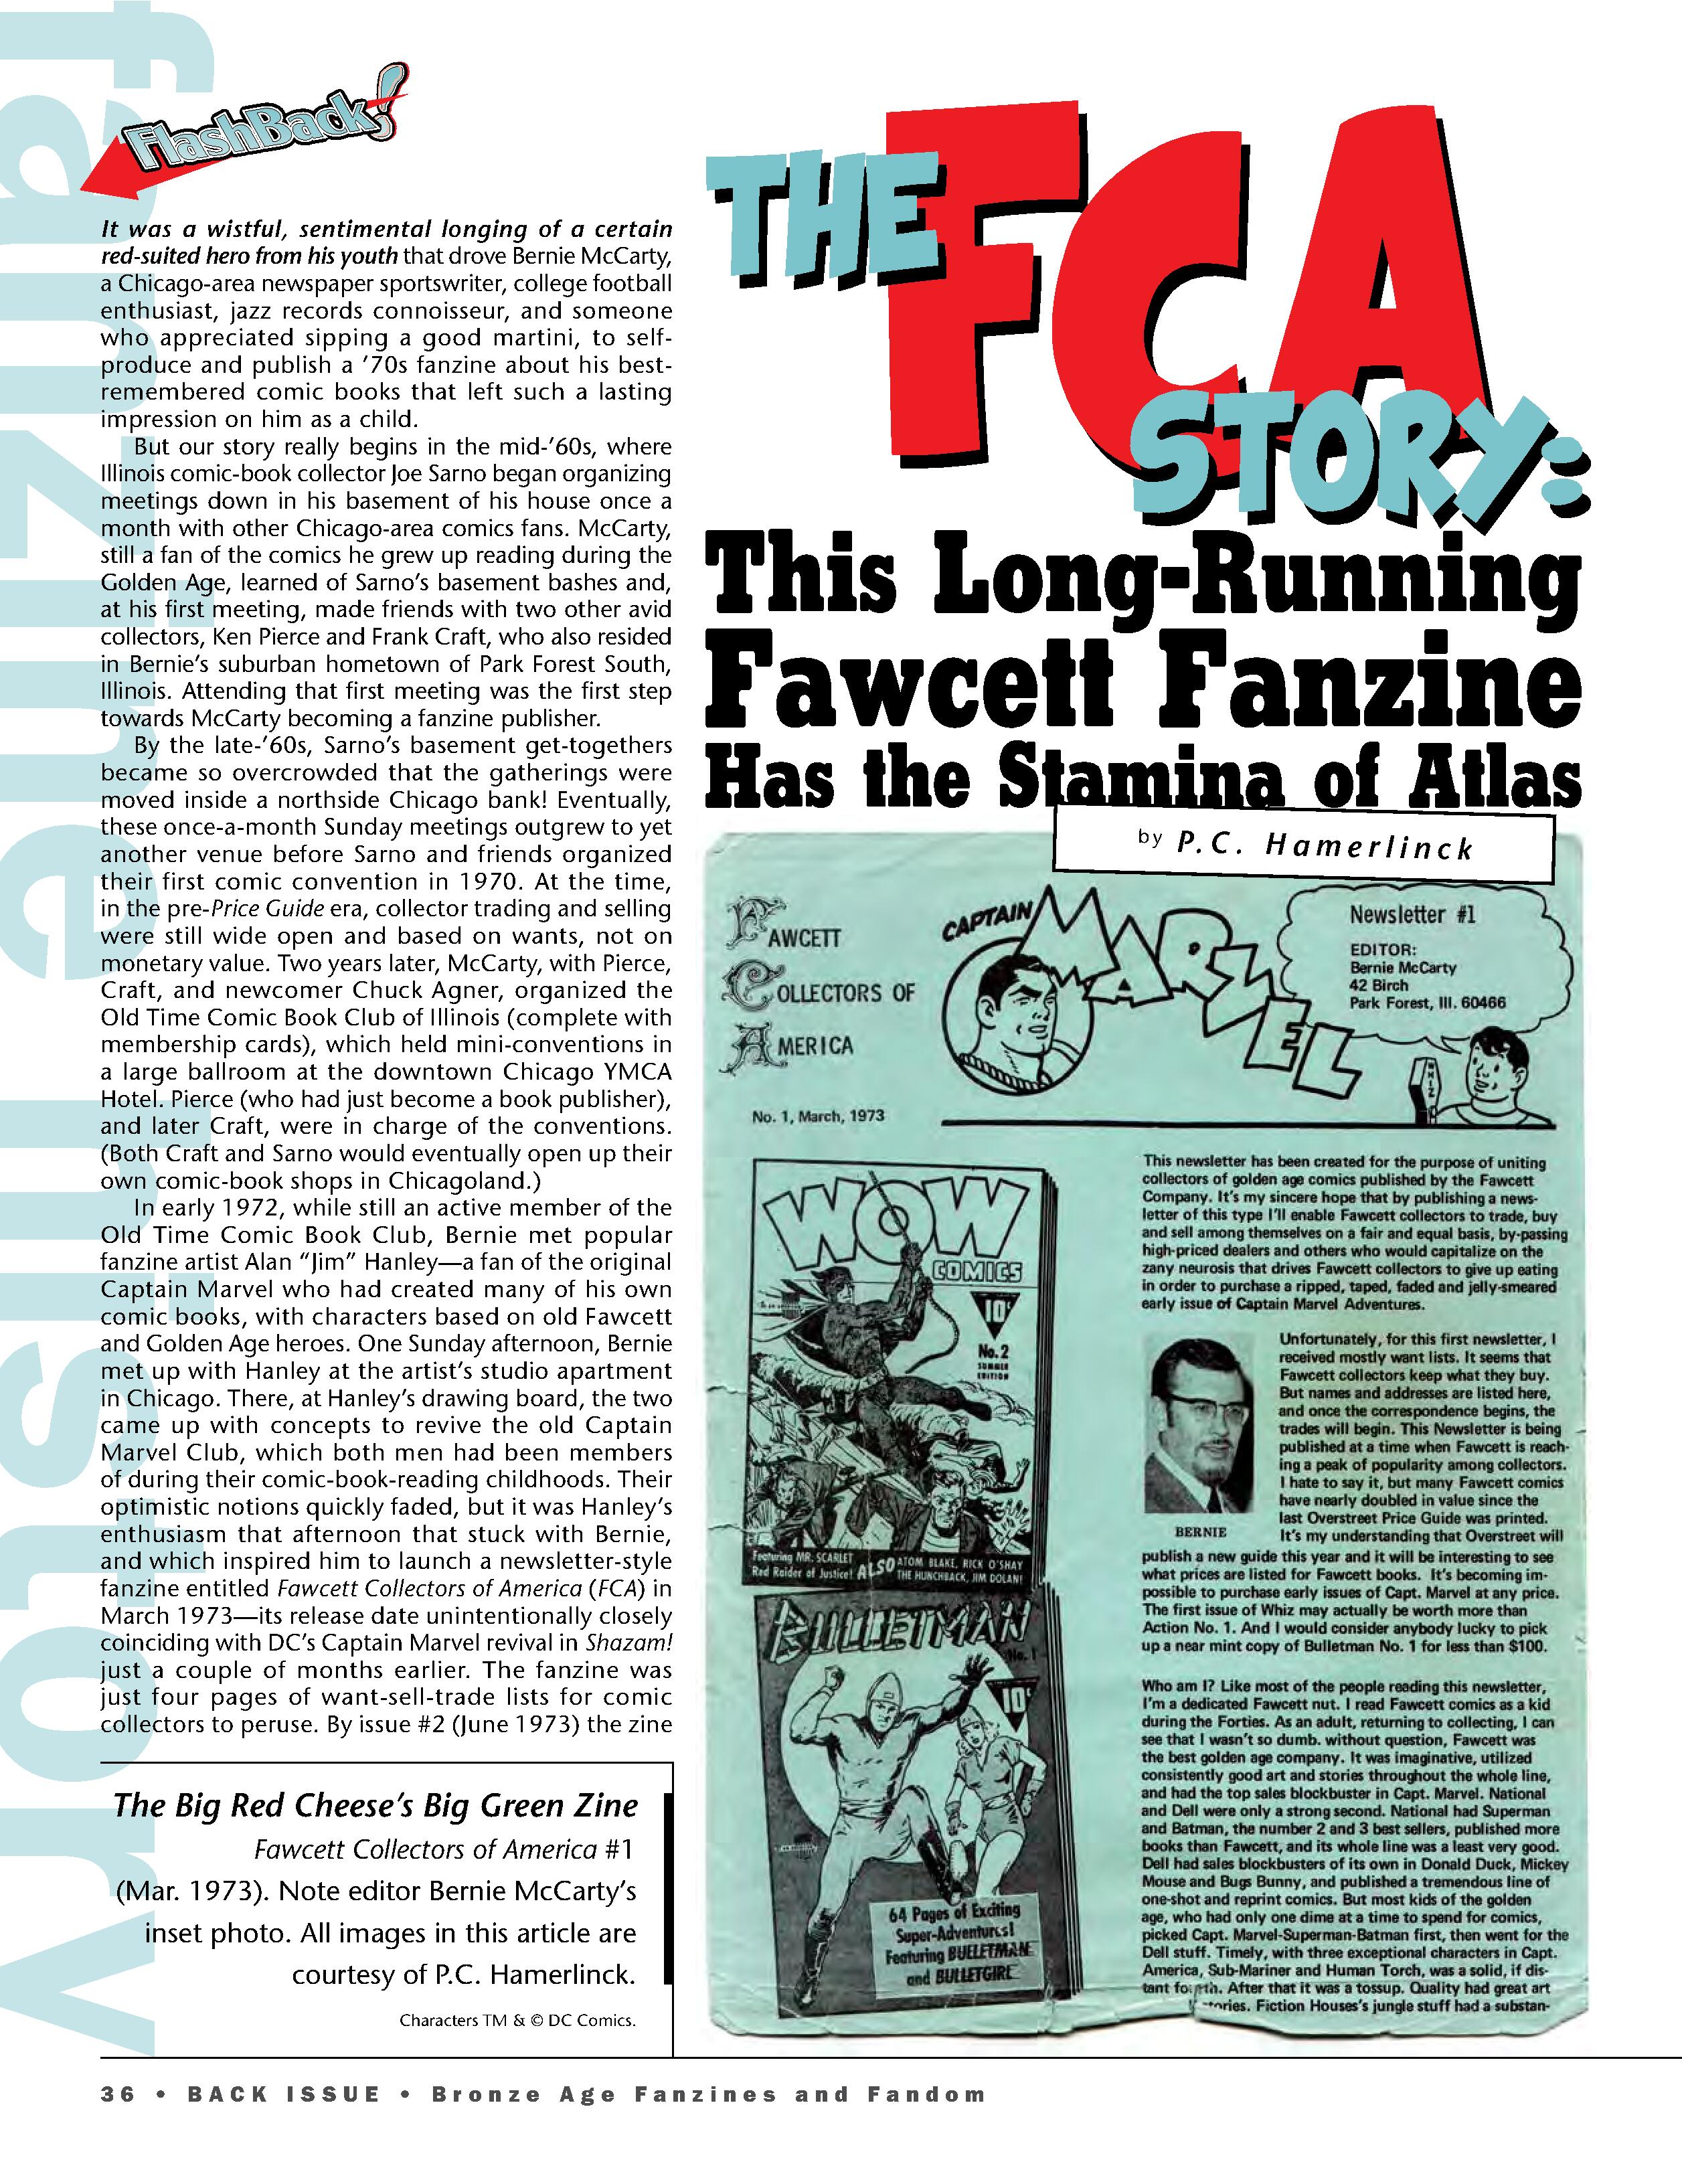 Read online Back Issue comic -  Issue #100 - 38